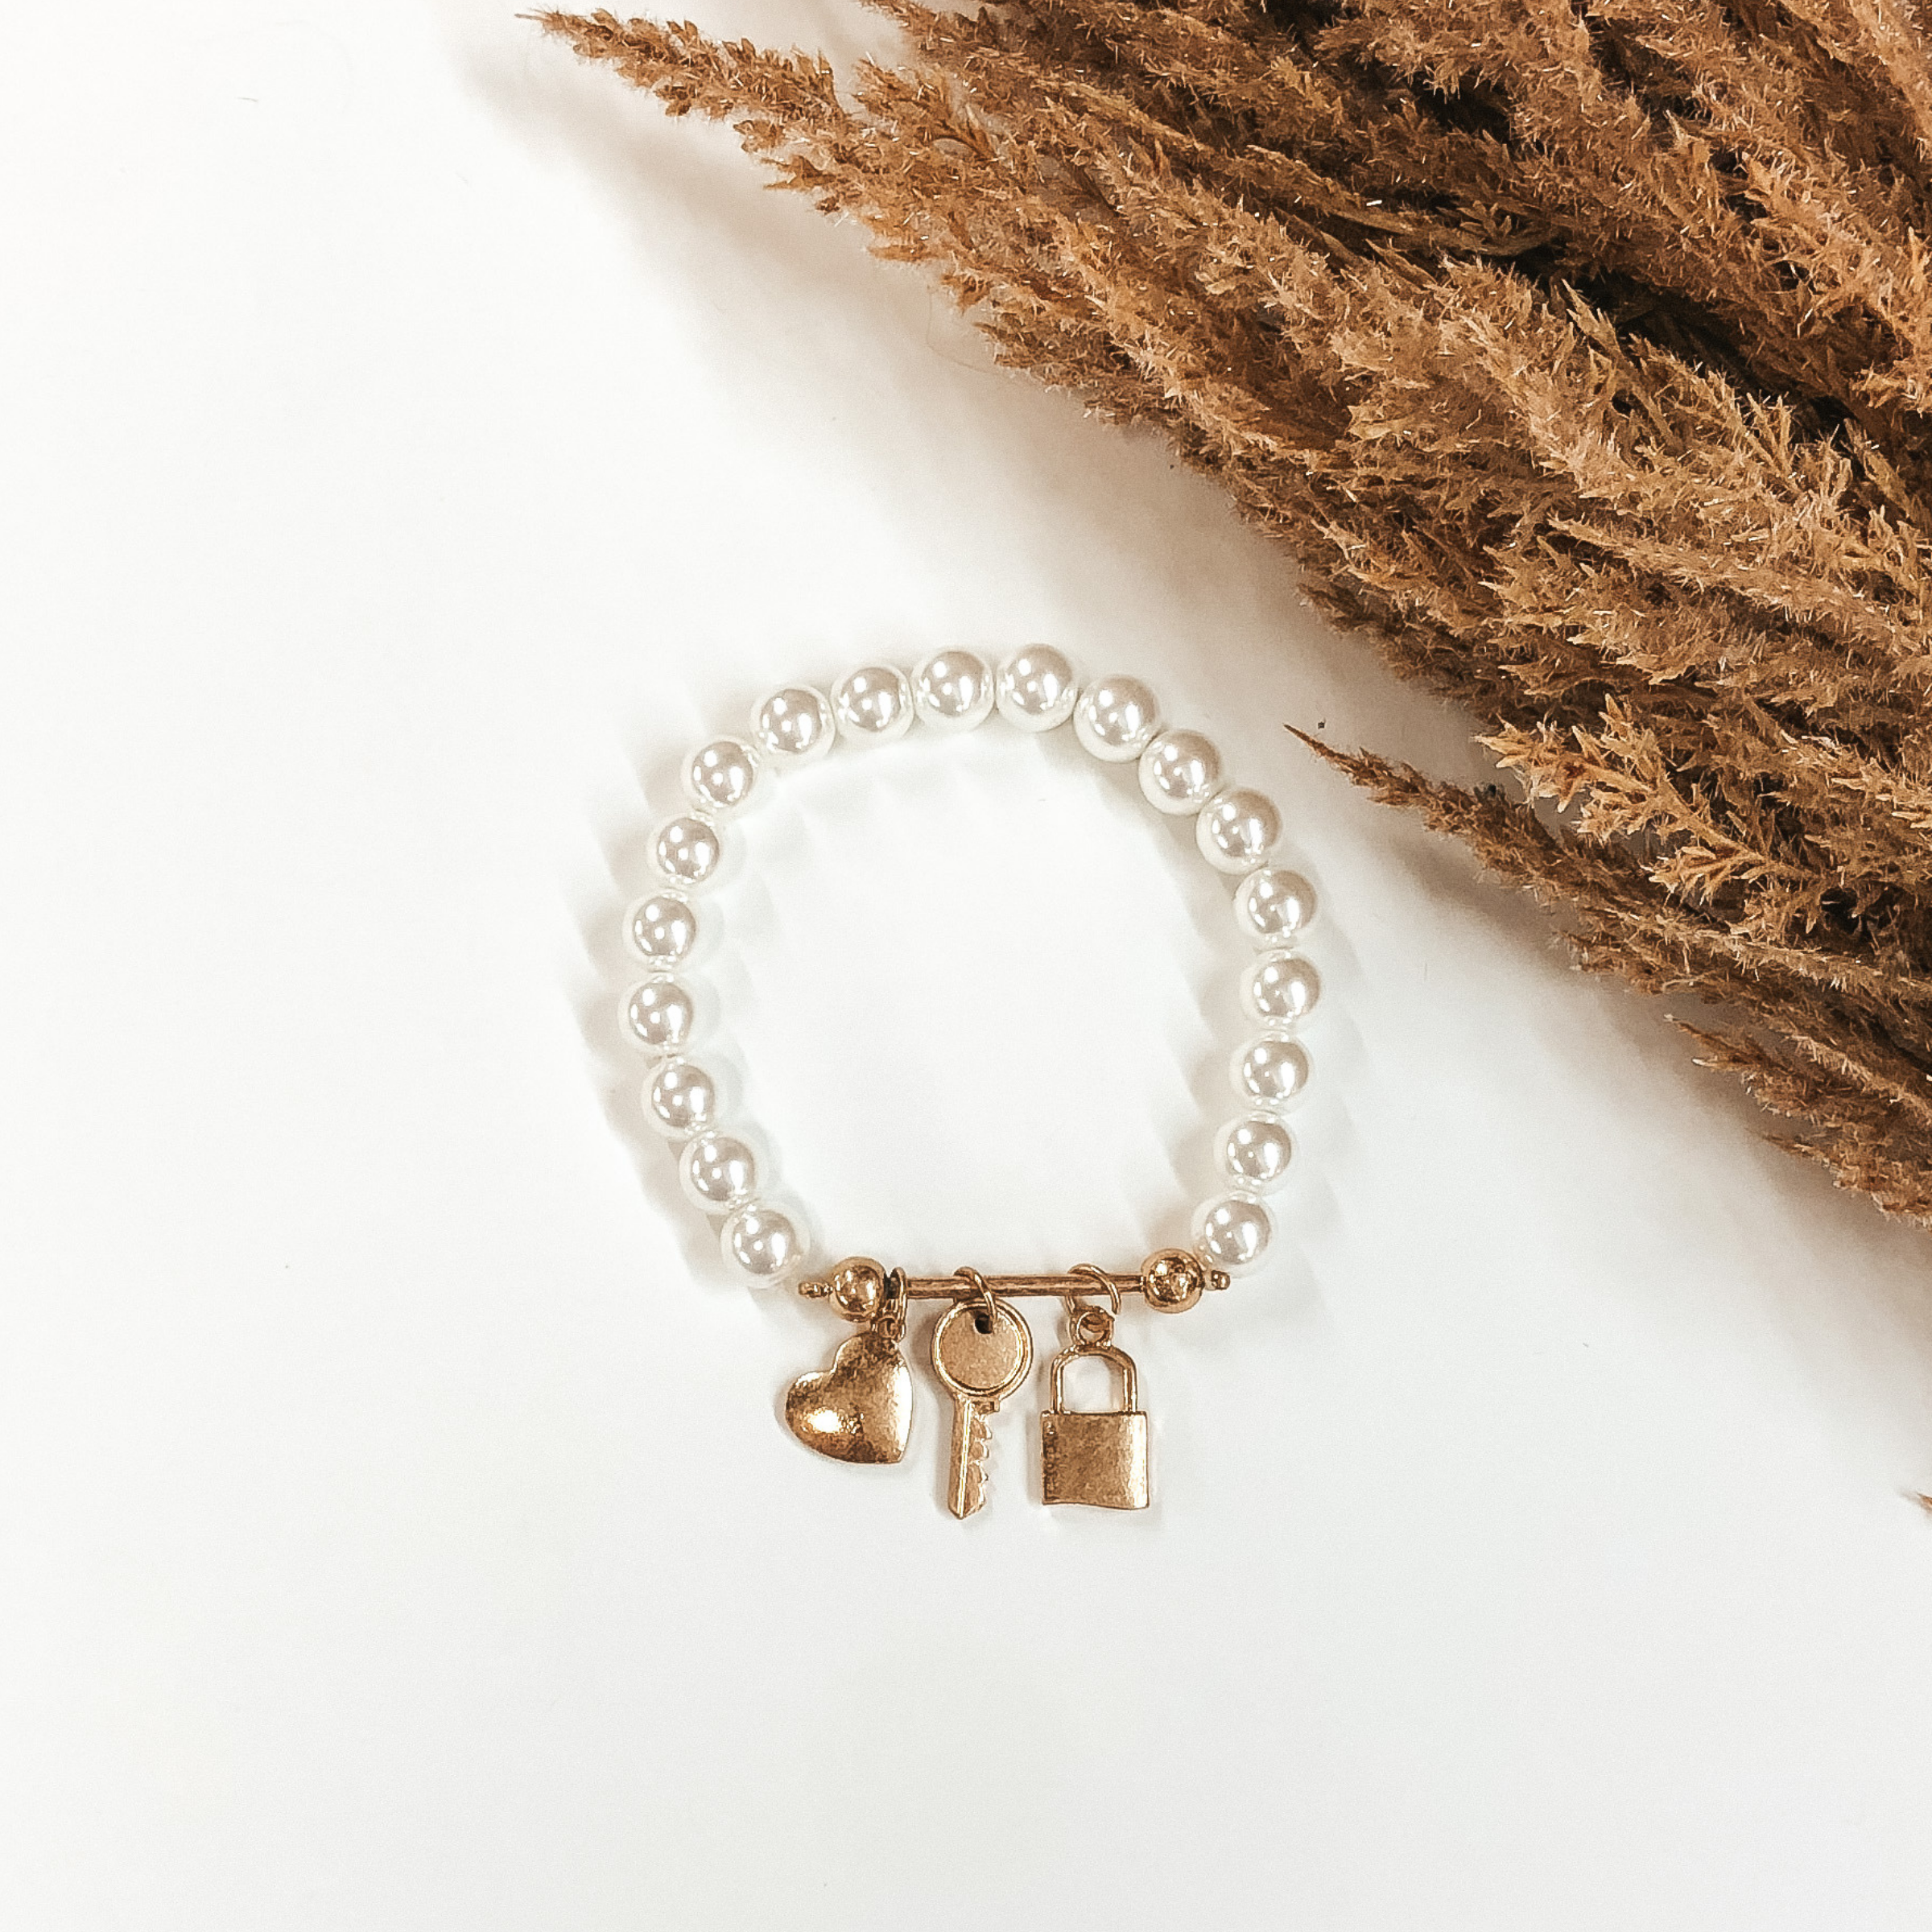 Lock Up Your Heart Bracelet in White/Gold - Giddy Up Glamour Boutique